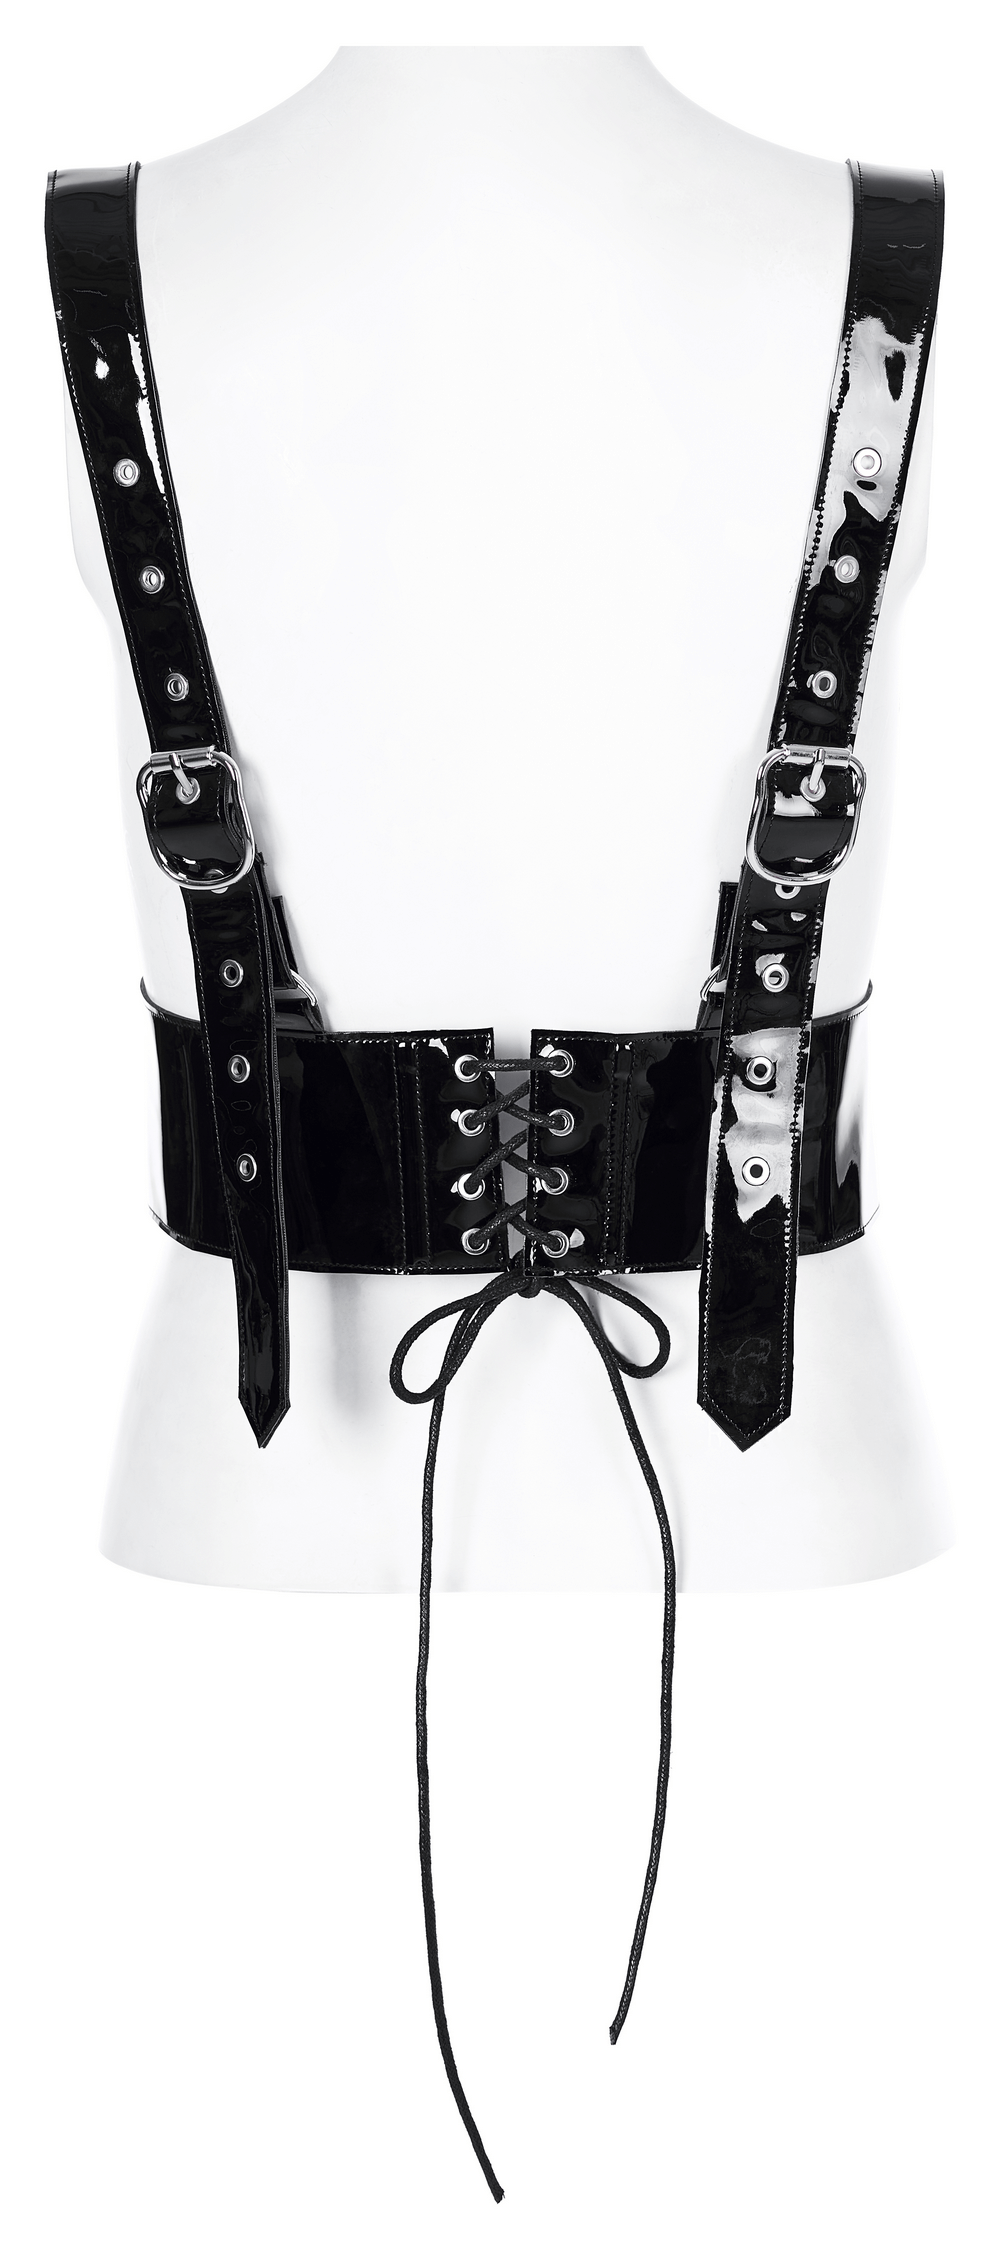 Glossy PU Leather Corset Belt with Metal Accents